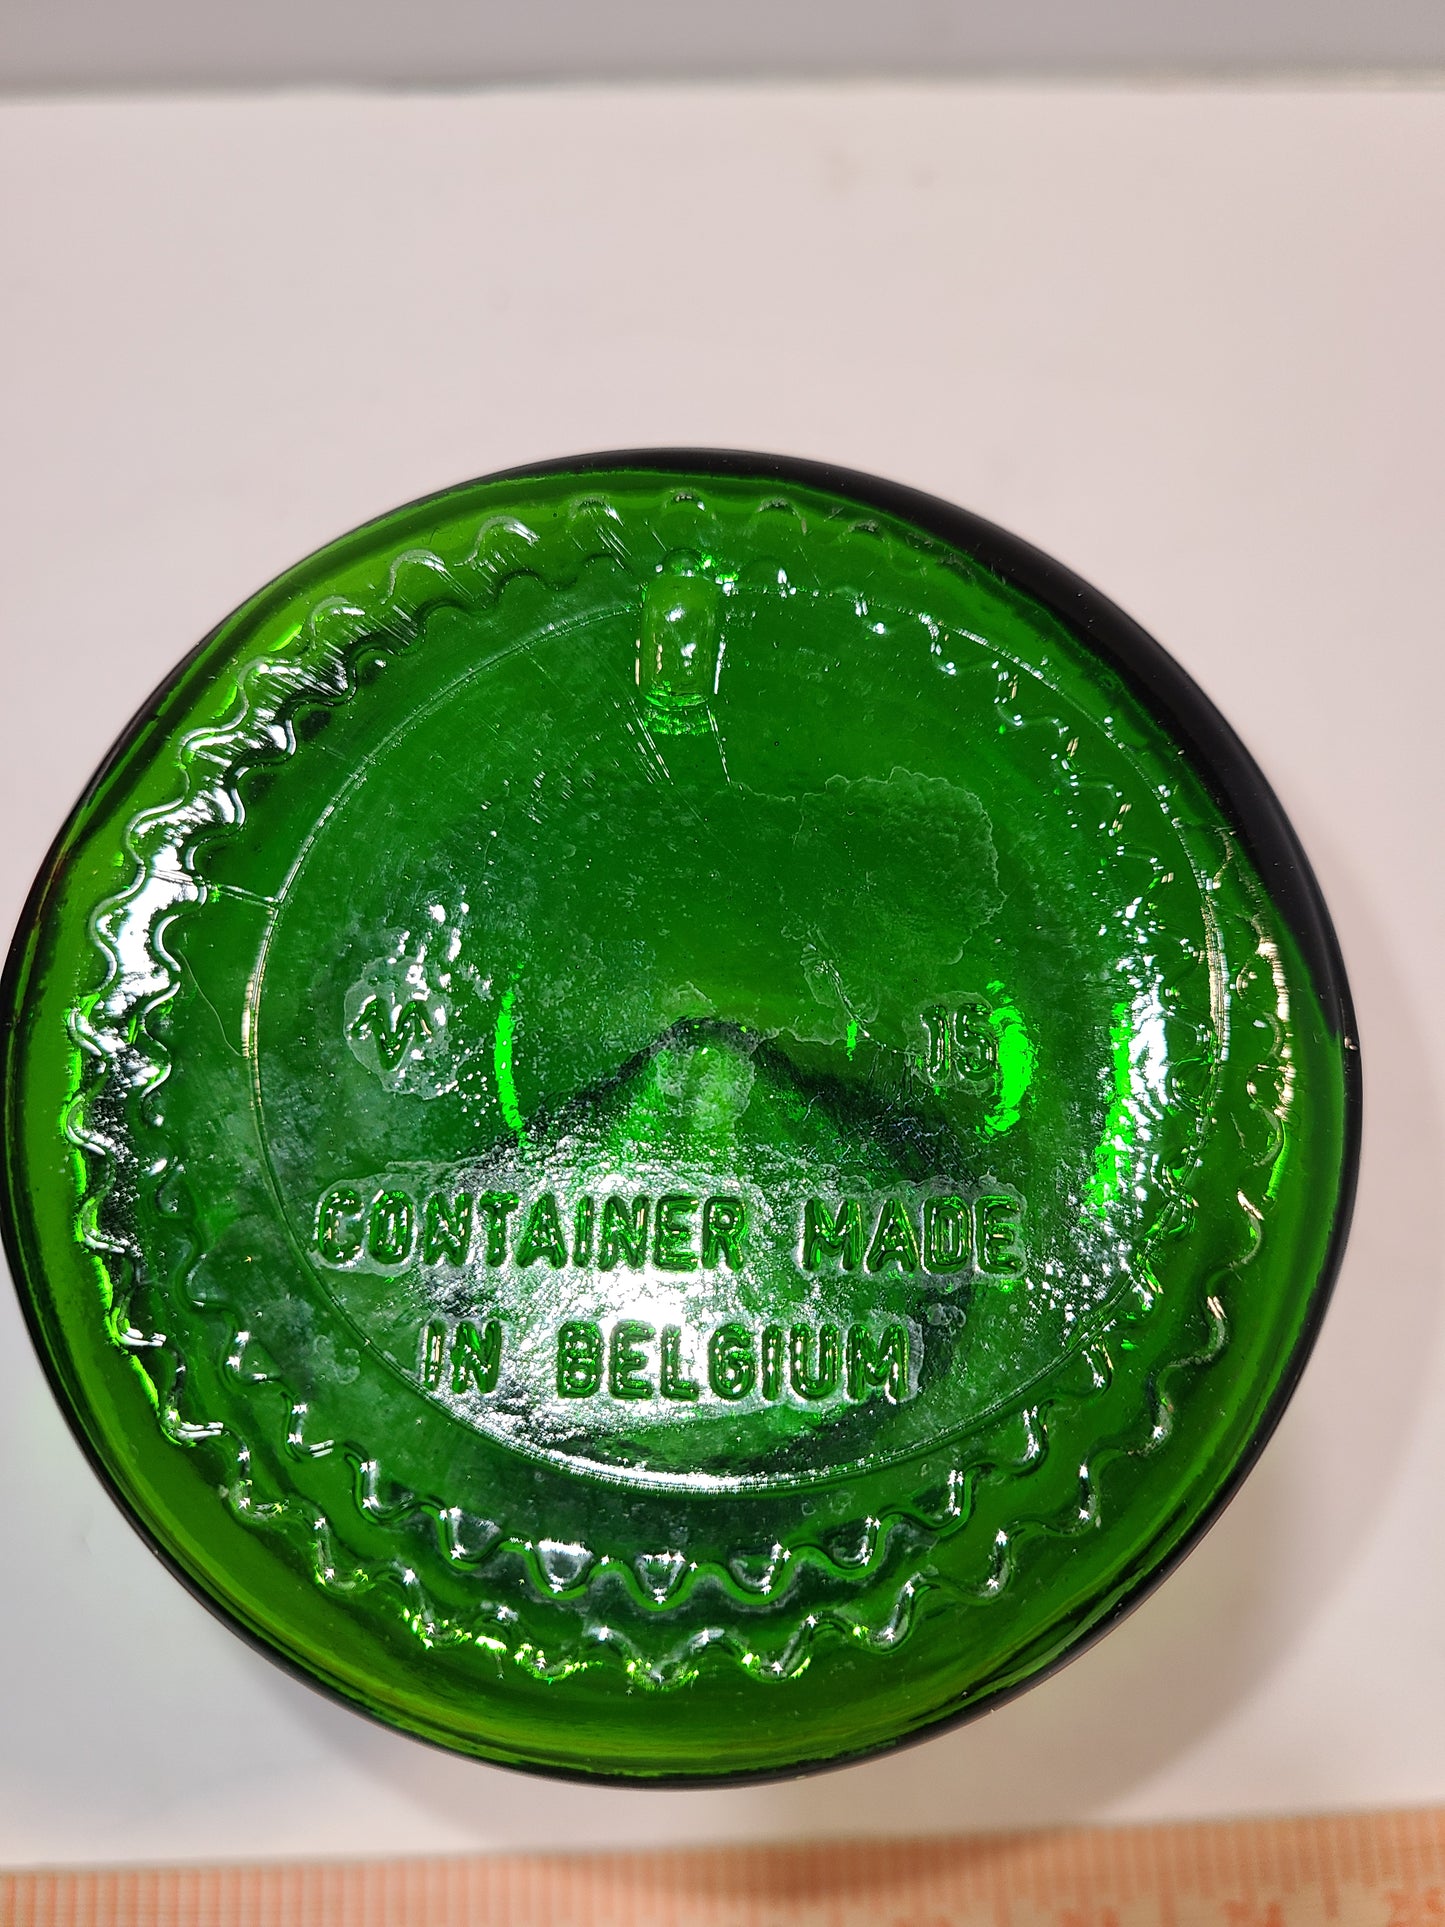 Vintage green glass container